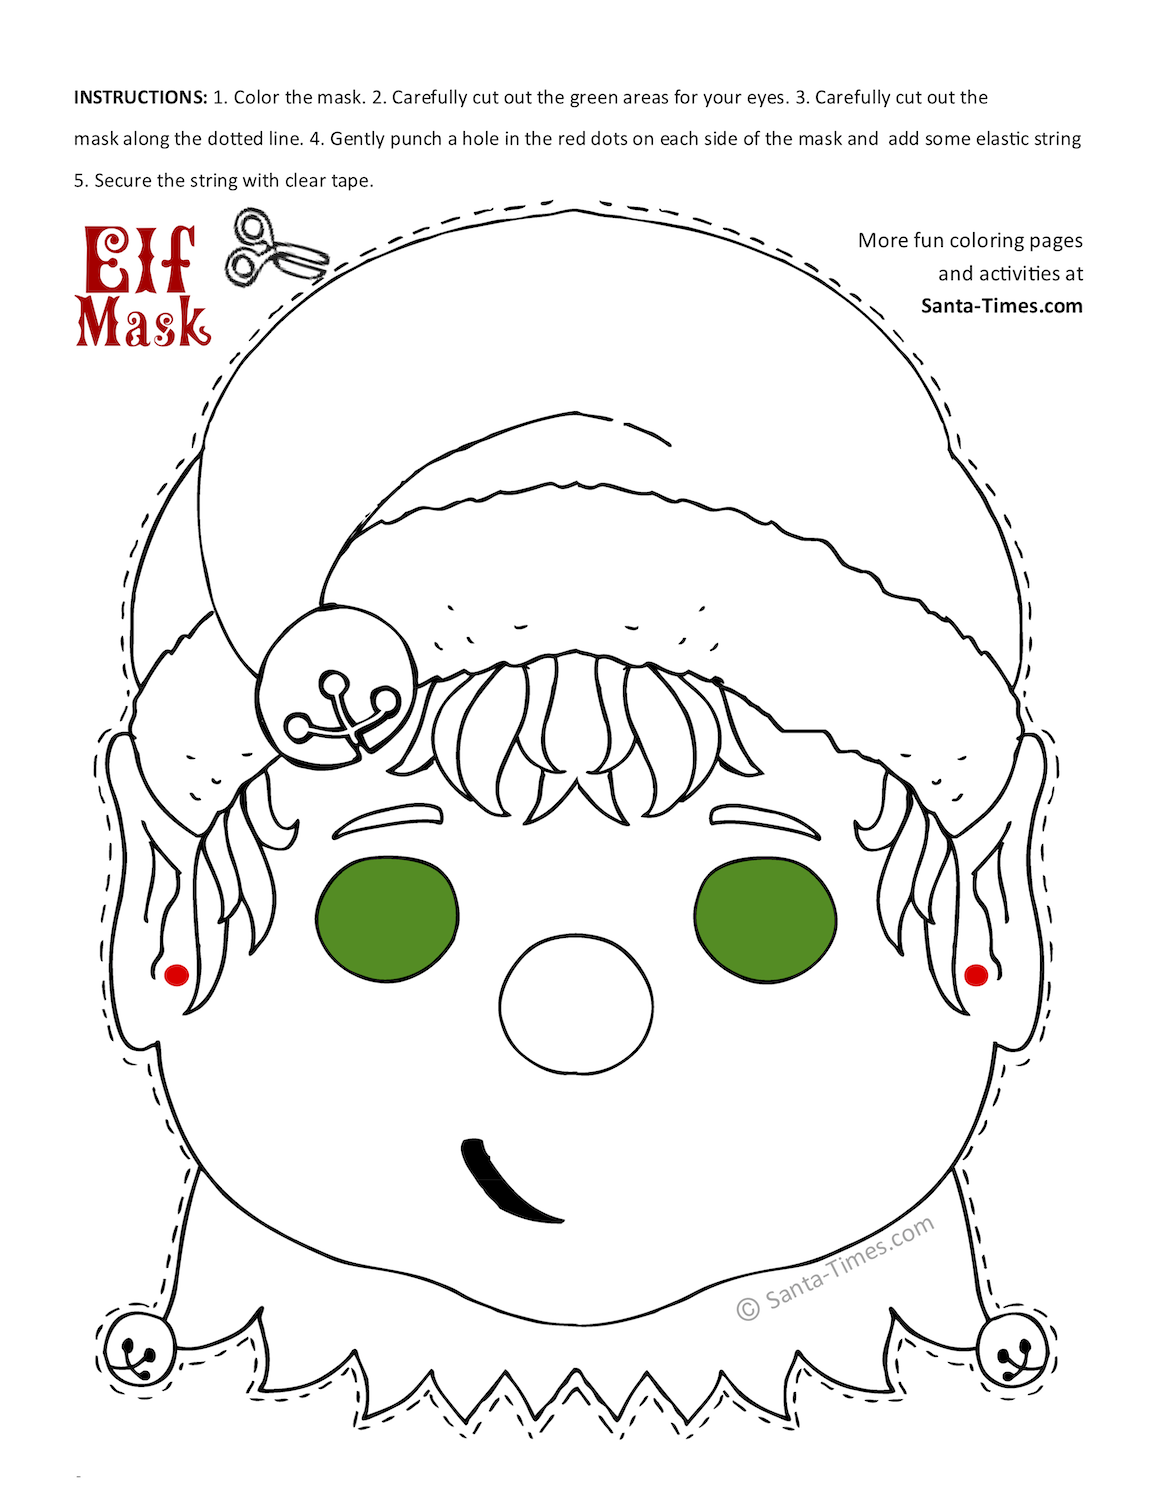 elf mask coloring page